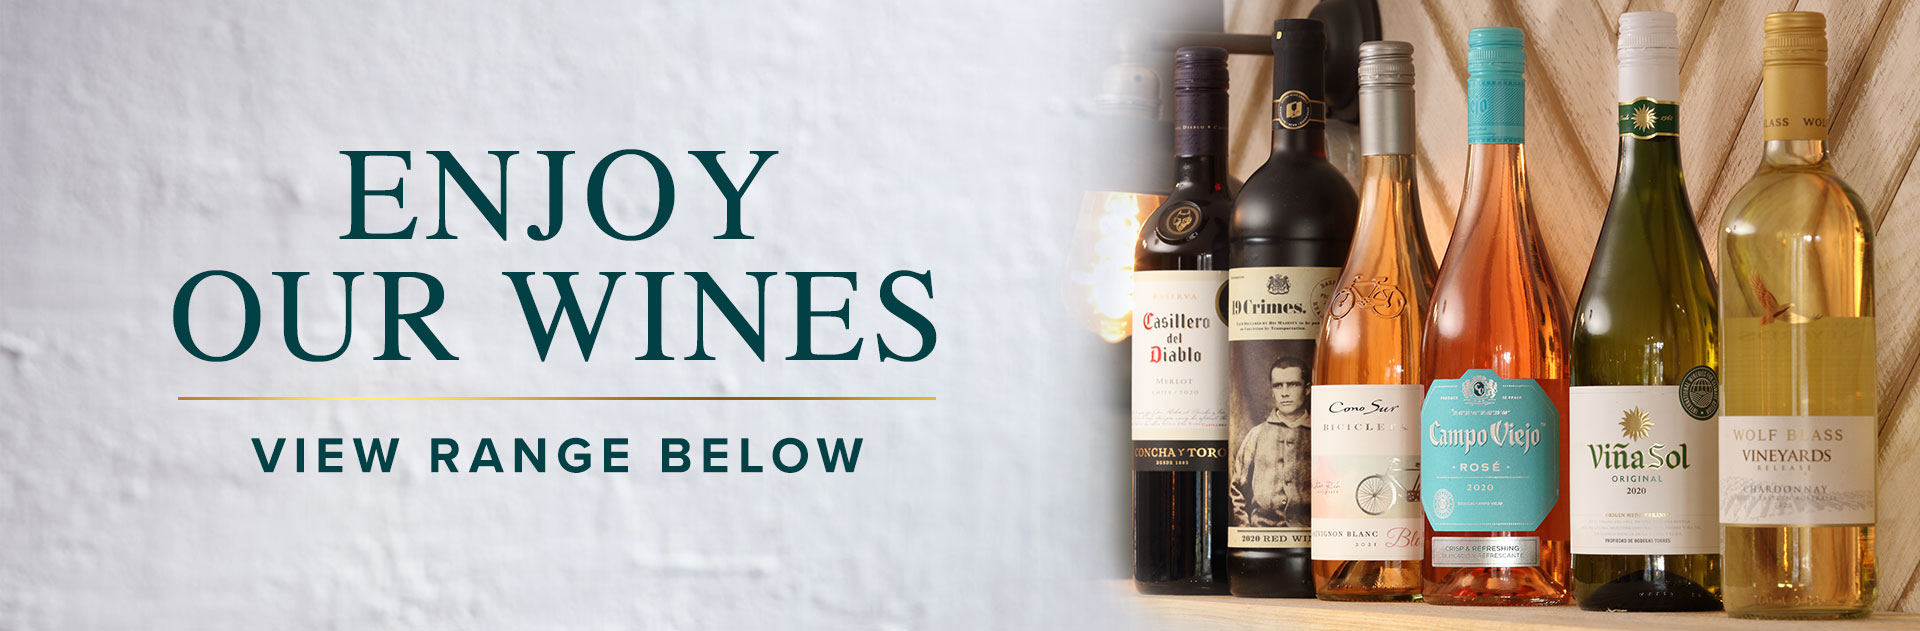 View our wine collection